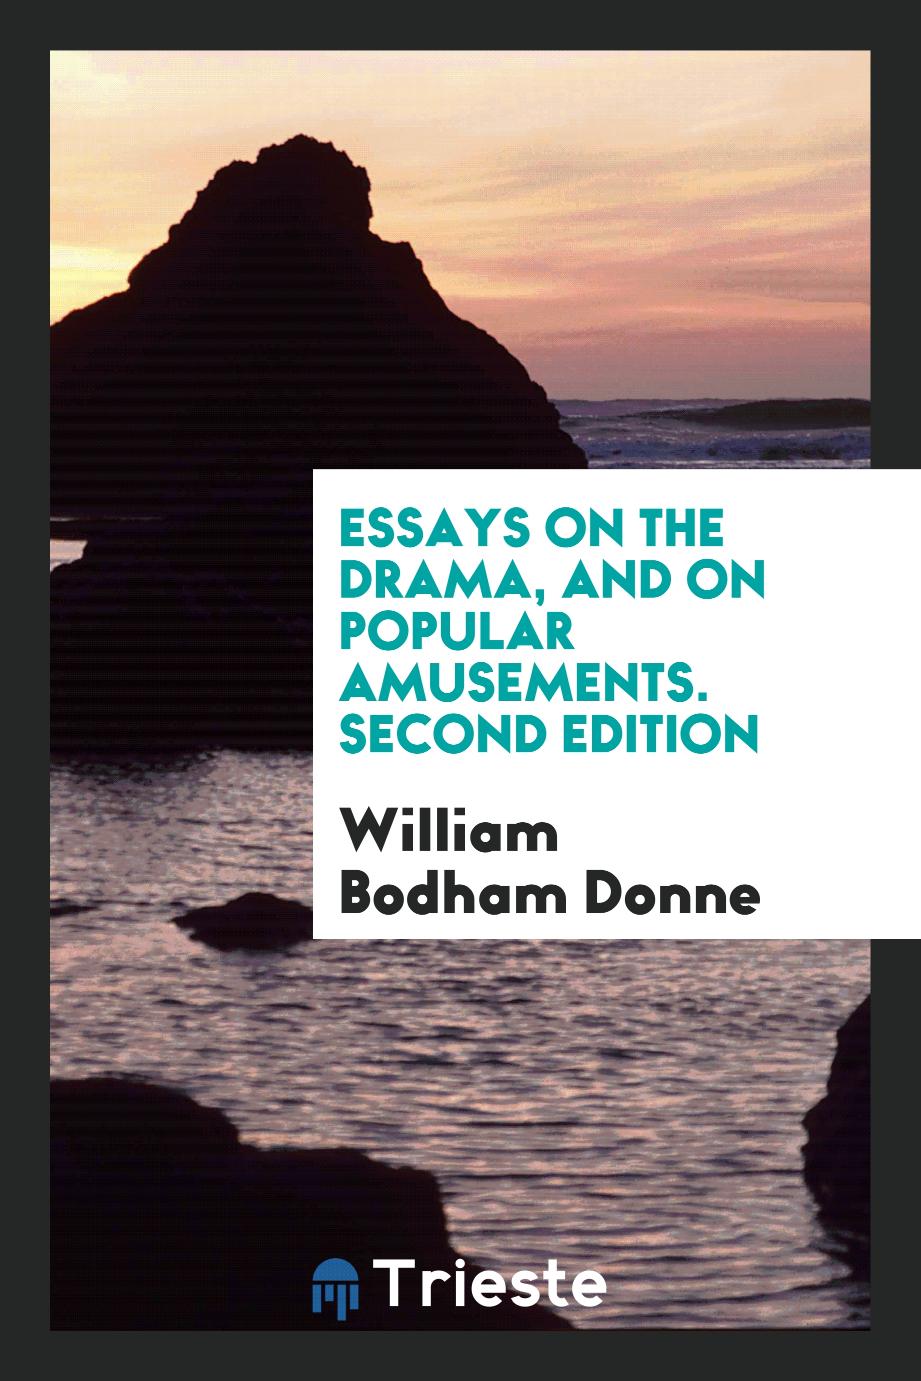 Essays on the Drama, and on Popular Amusements. Second Edition